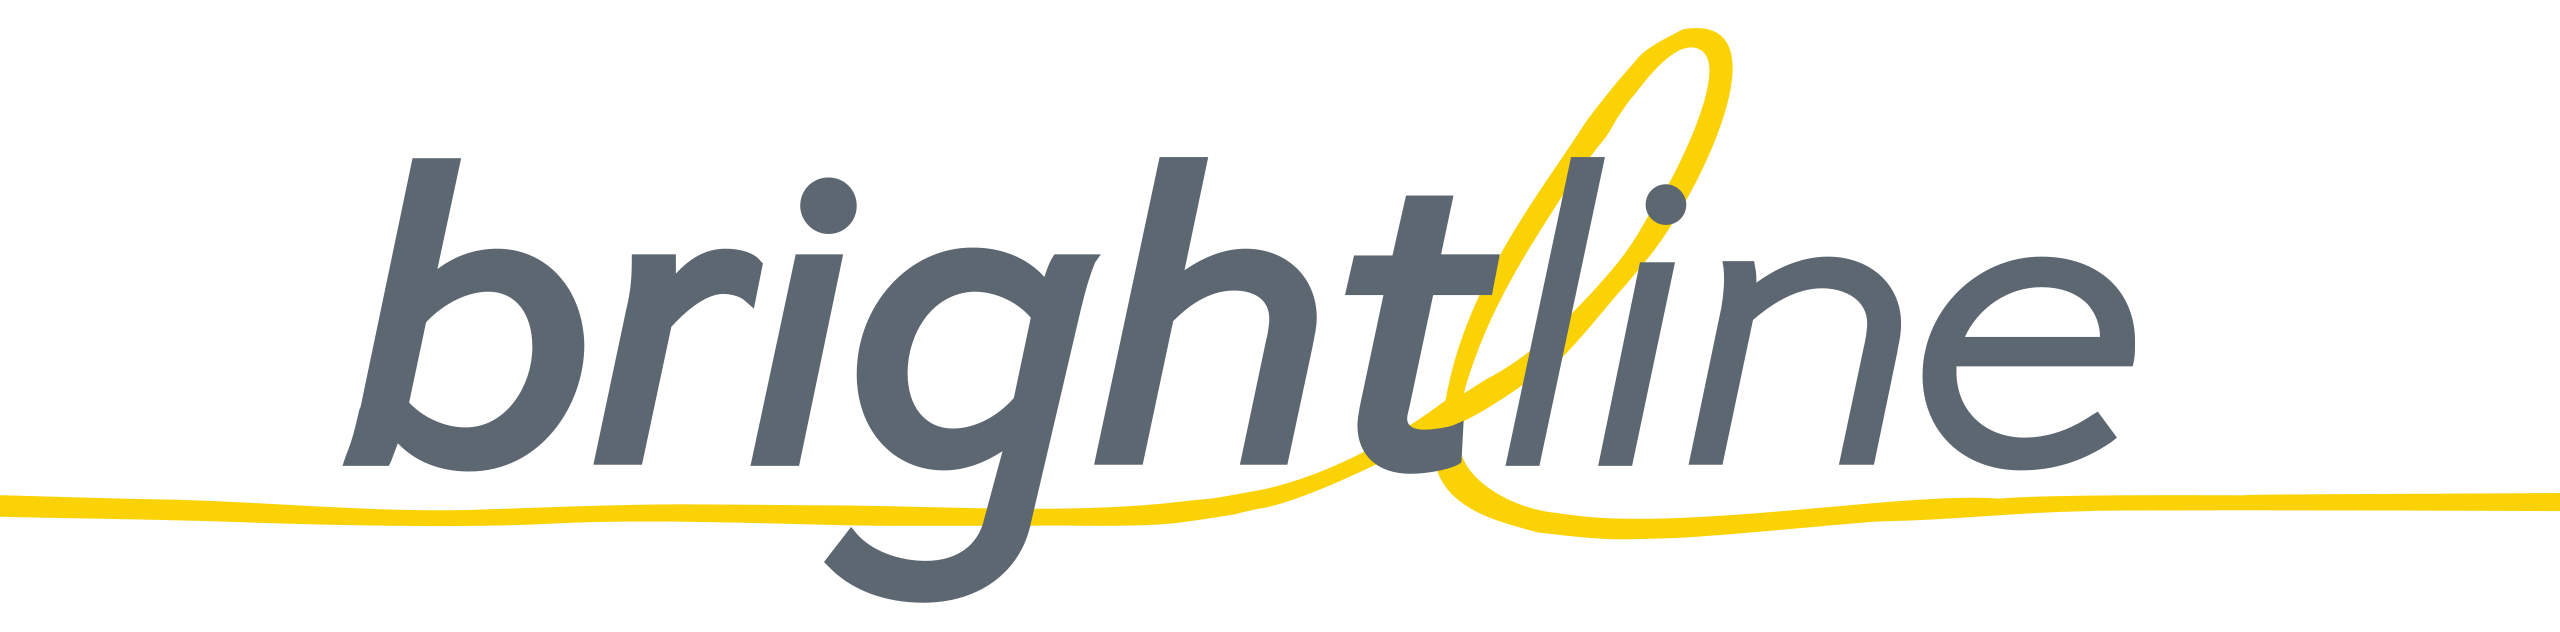 Brightline coupon codes, promo codes and deals